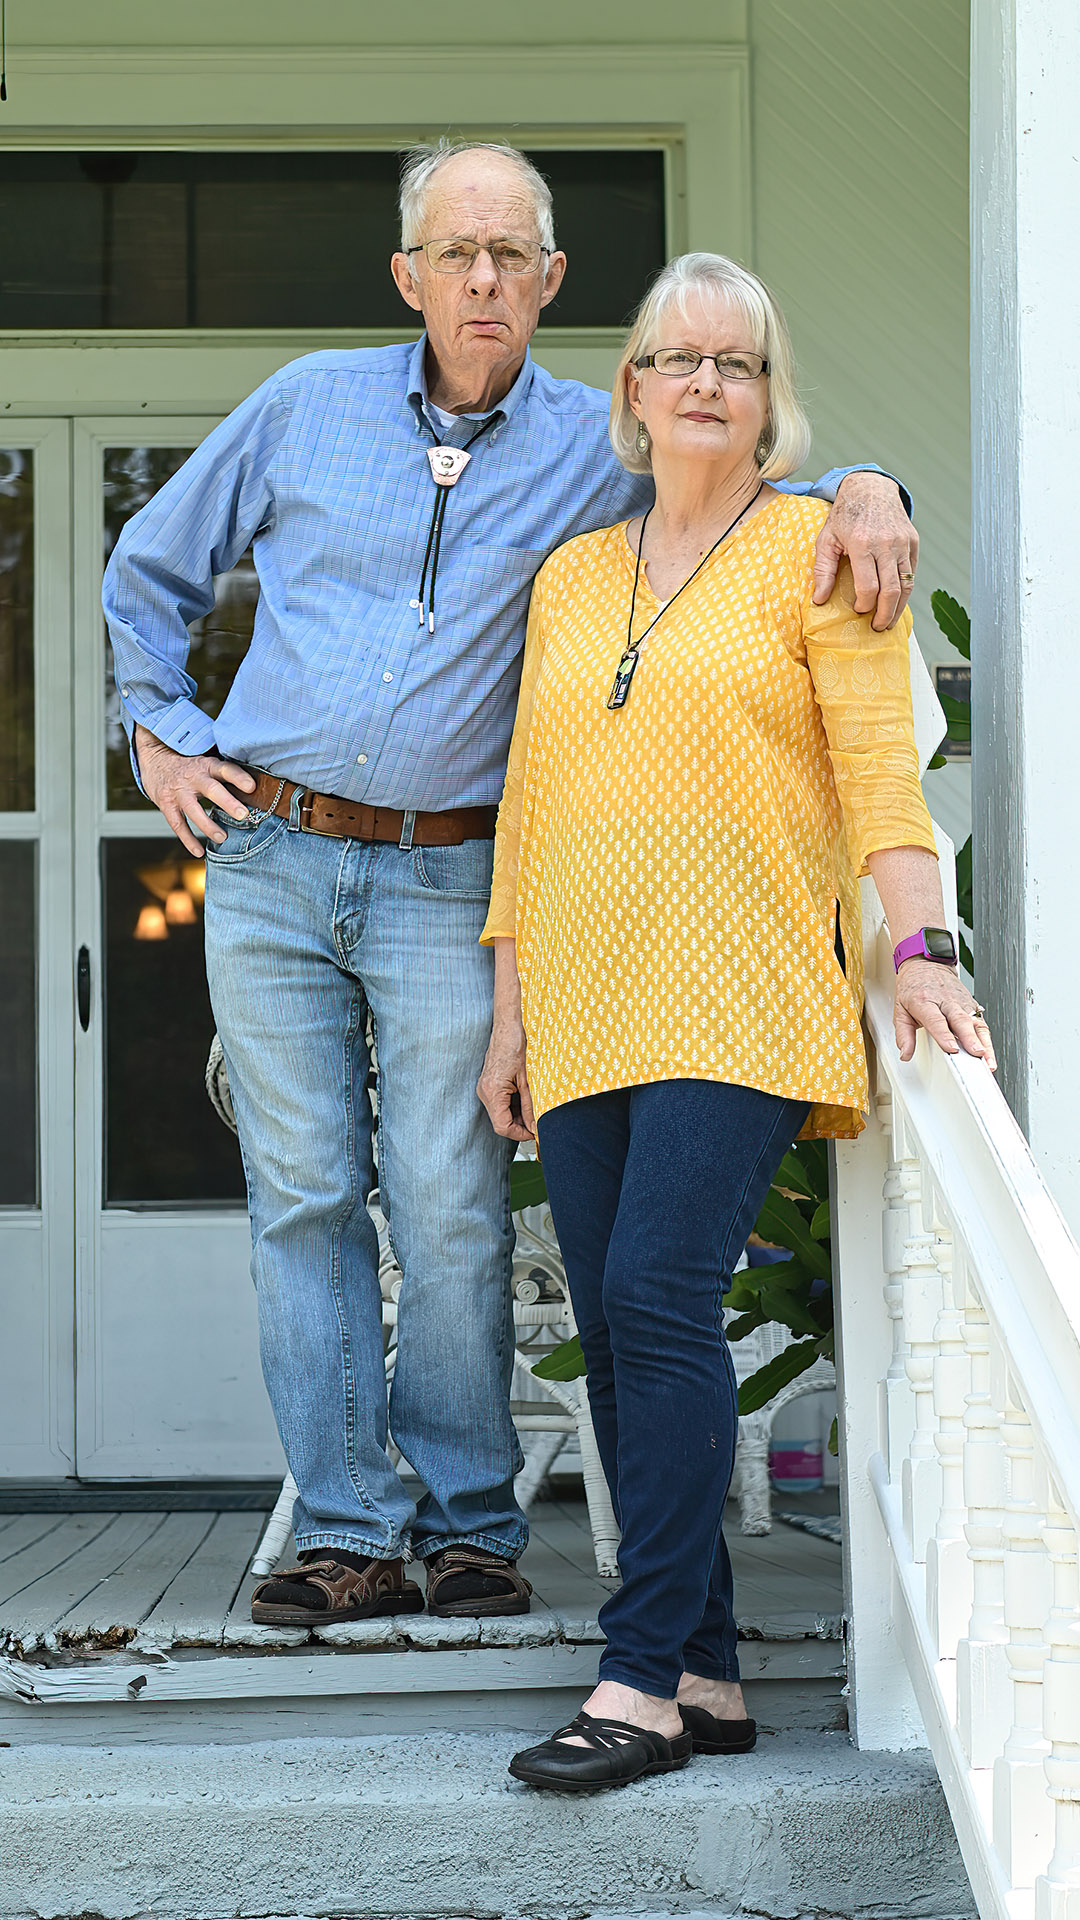 Linda Munoz and Charles Munoz pose for a portrait while standing next to a railing on a porch in front of a double-door entrance to a building.